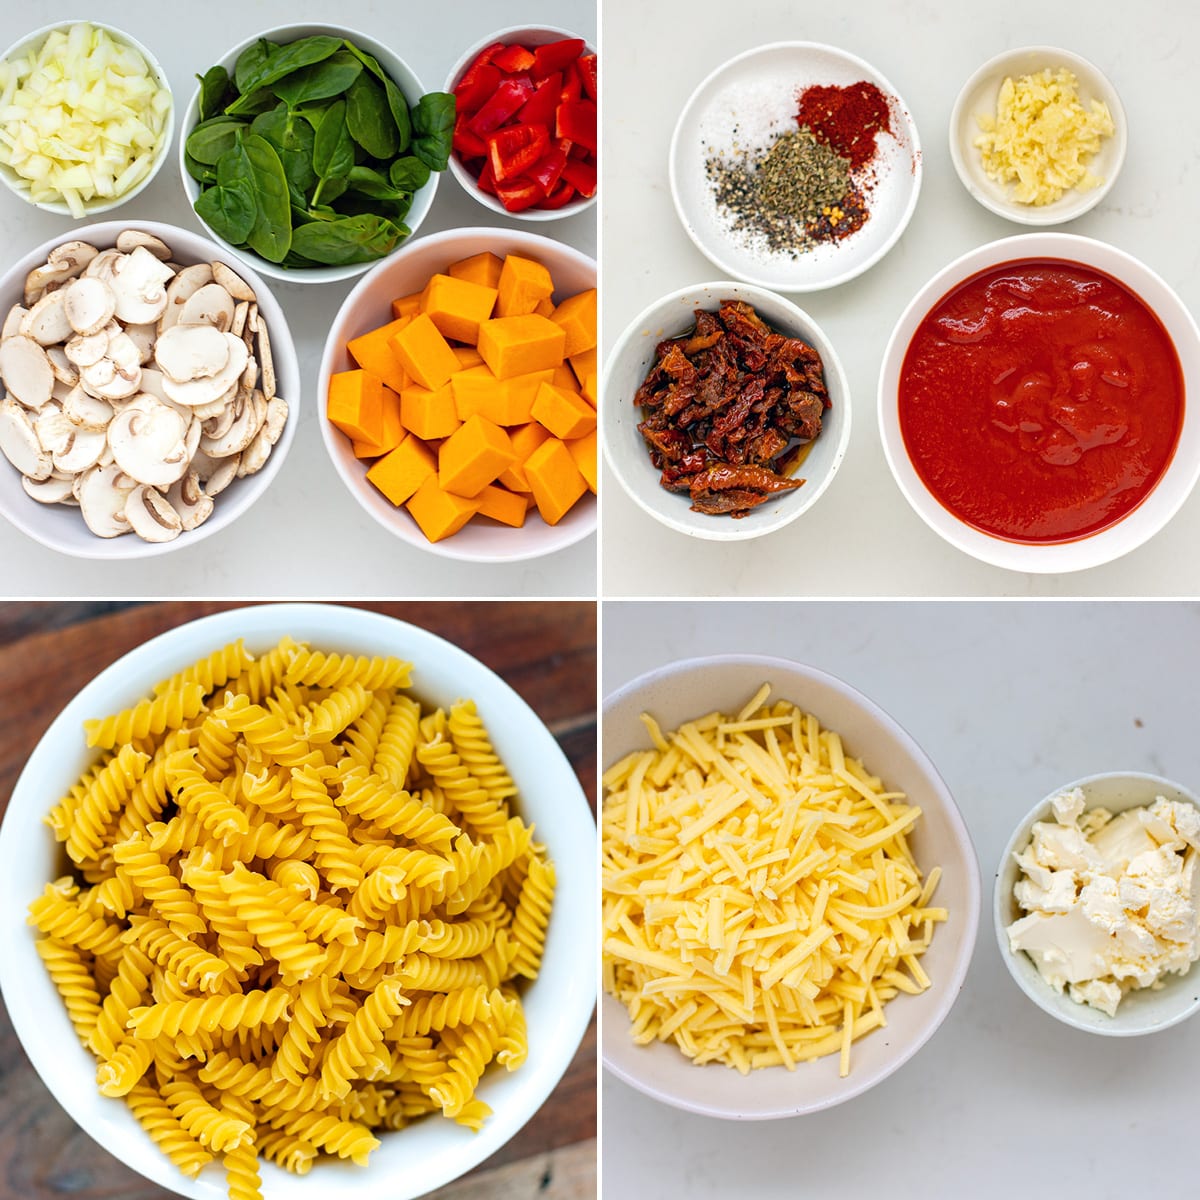 Ingredients for vegetable pasta bake: mushrooms, butternut squash, baby spinach, onions, and red peppers; tomato sauce, sun-dried tomatoes, garlic, pepper, chili, salt; fusilli pasta, feta and grated cheese.